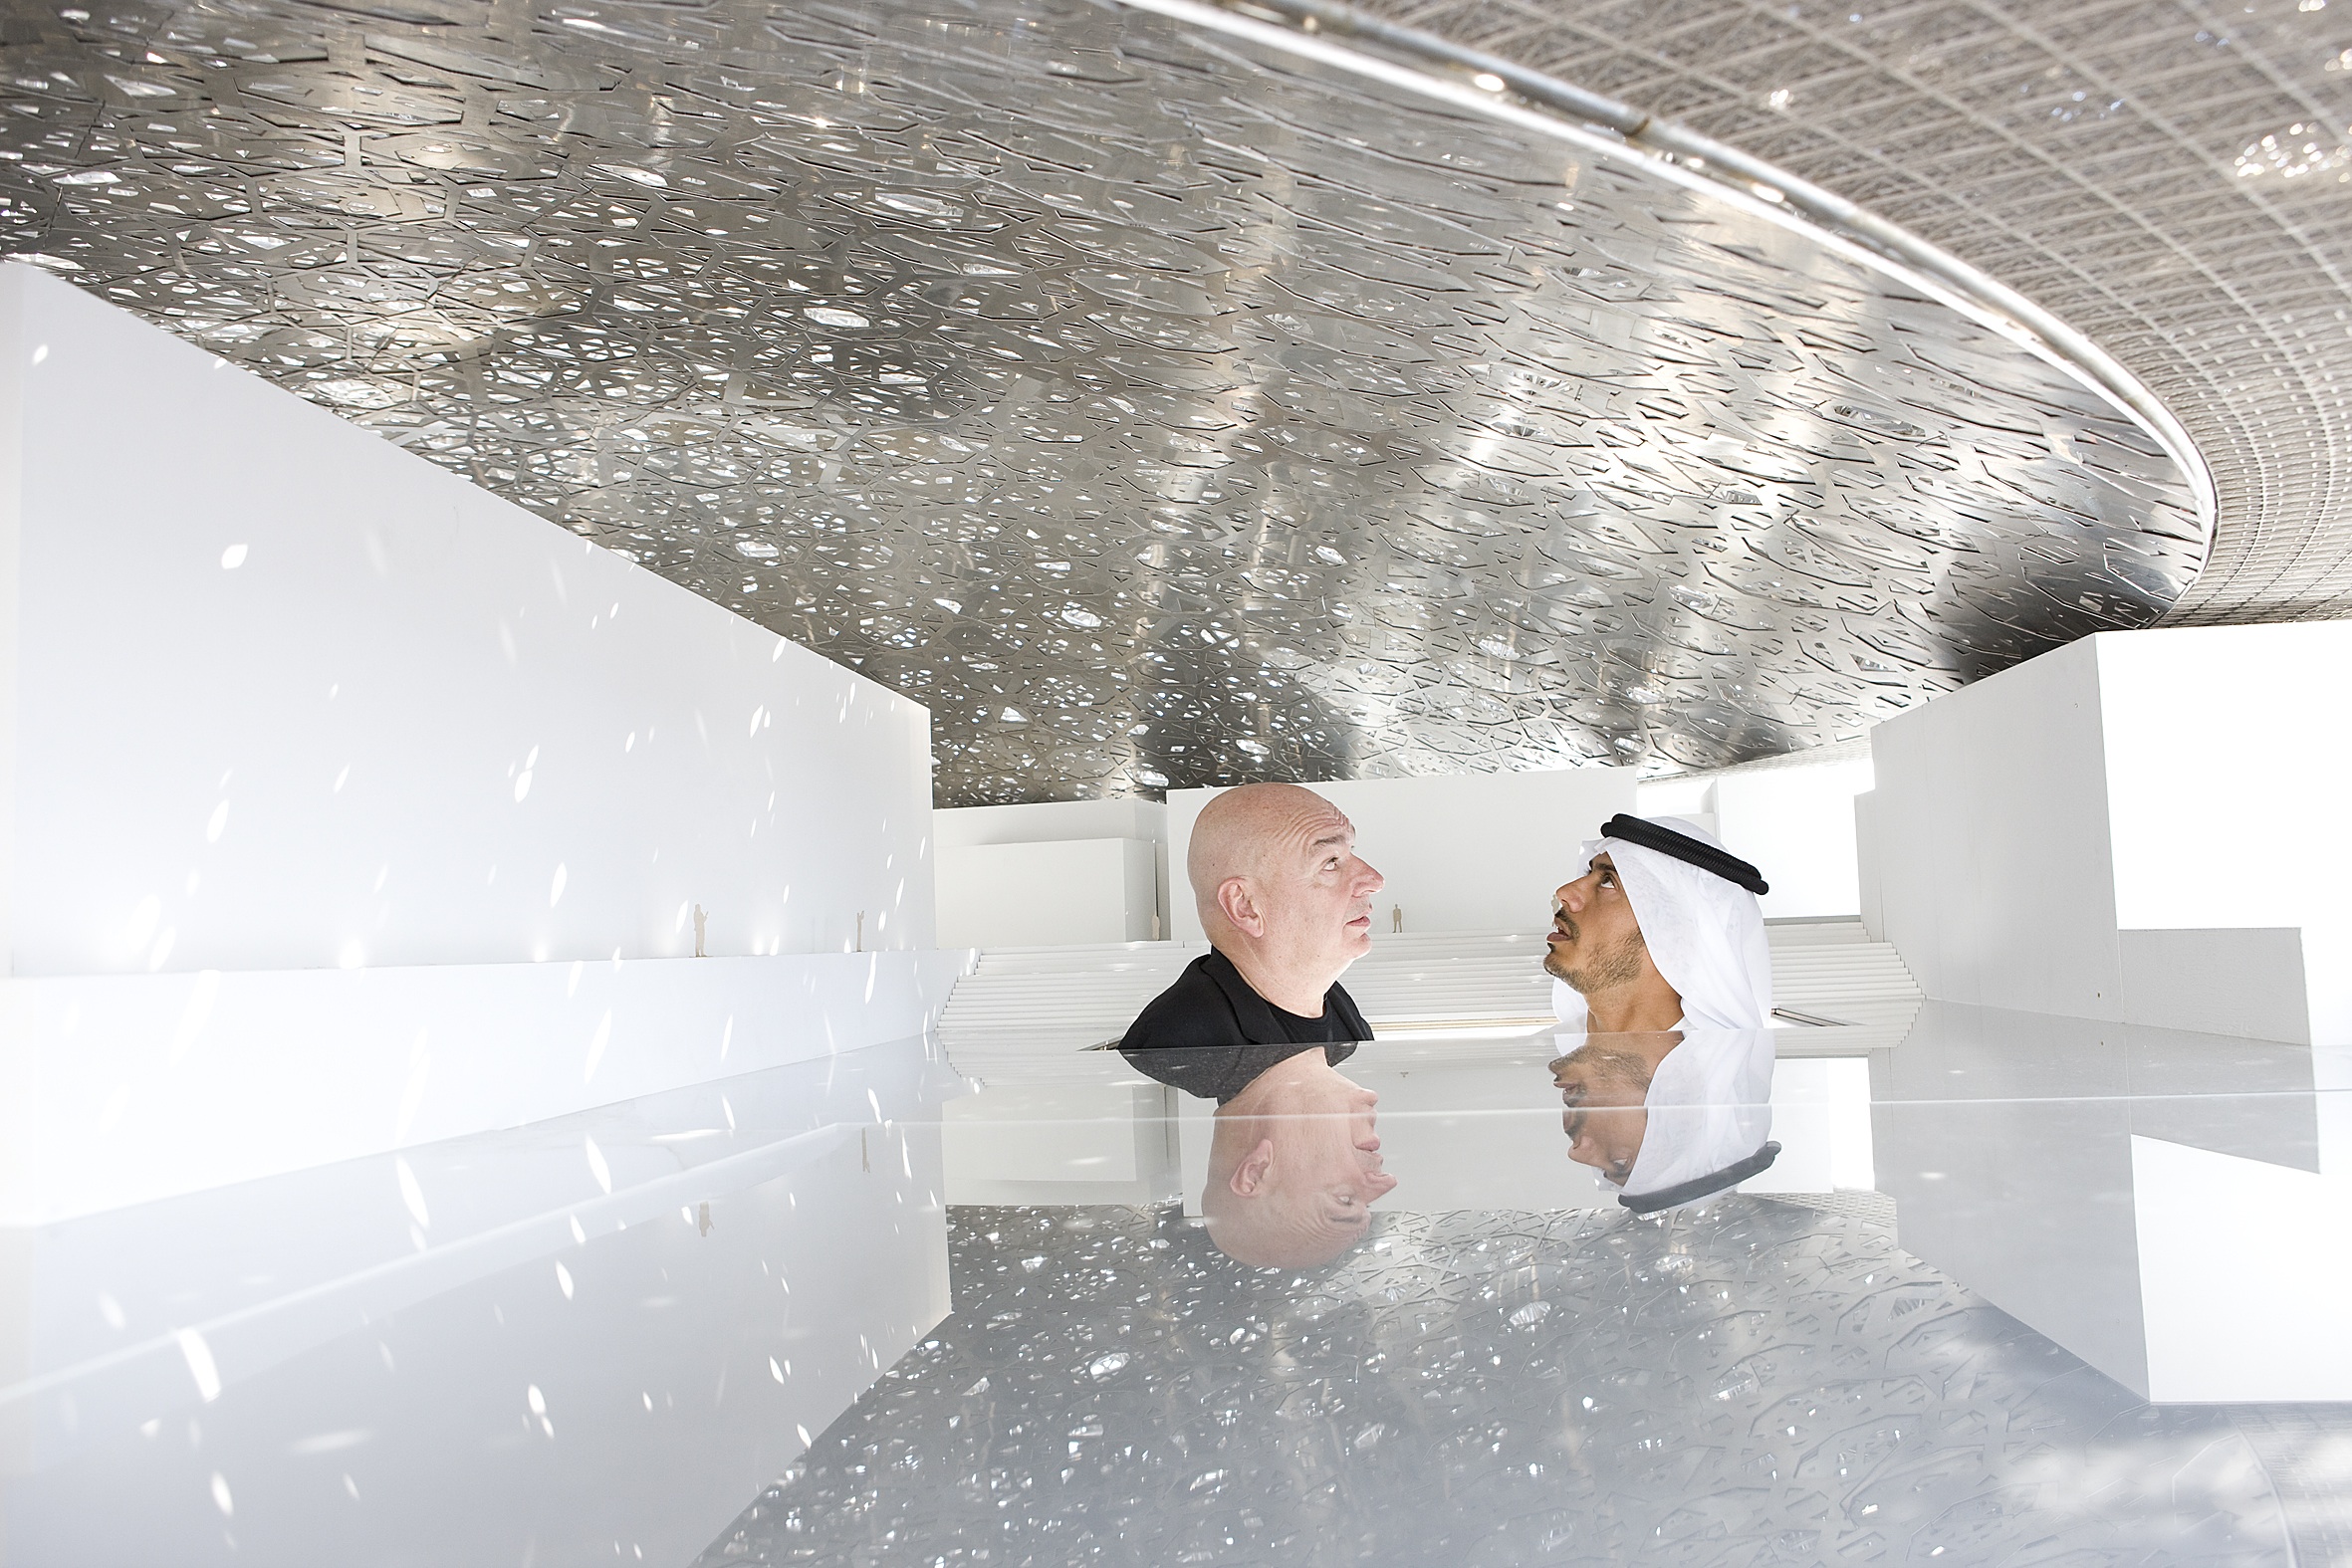 jean_nouvel_and_he_sheikh_sultan_-_under_mock_up_dome_1